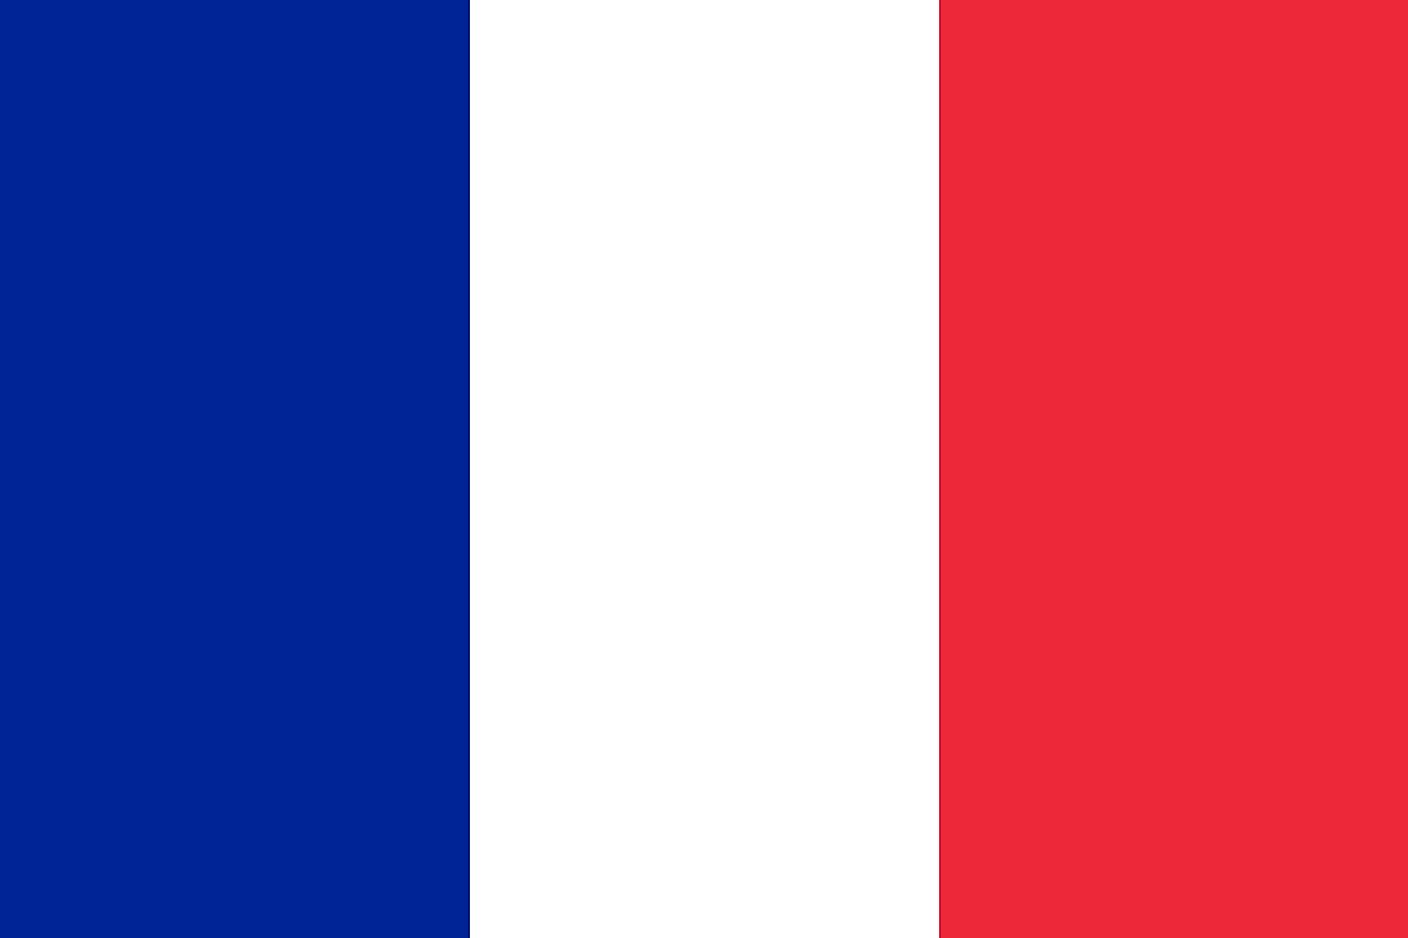  Guadeloupe Flag 3' x 5' for a pole - French region of